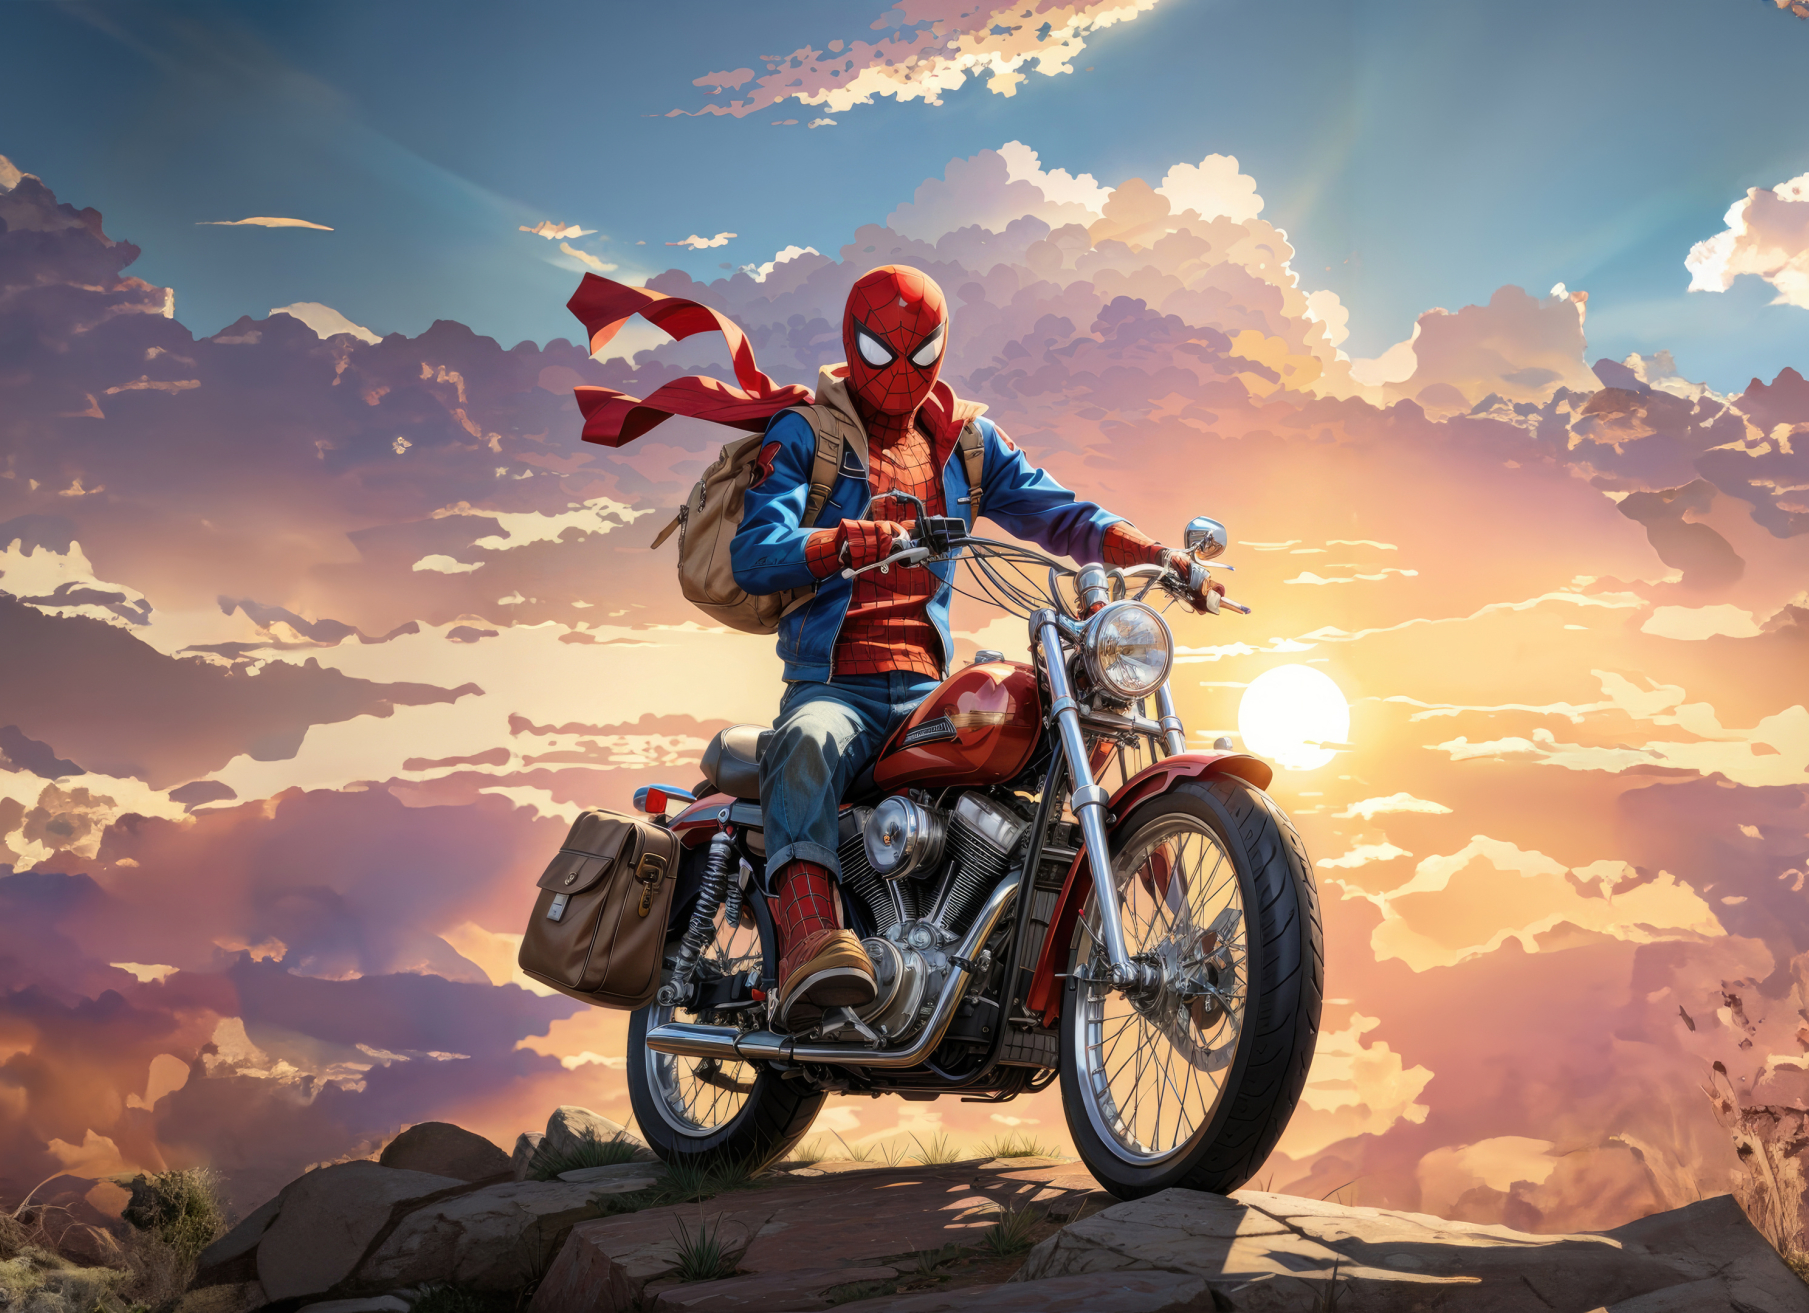 Spider-Man: Homecoming for apple download free